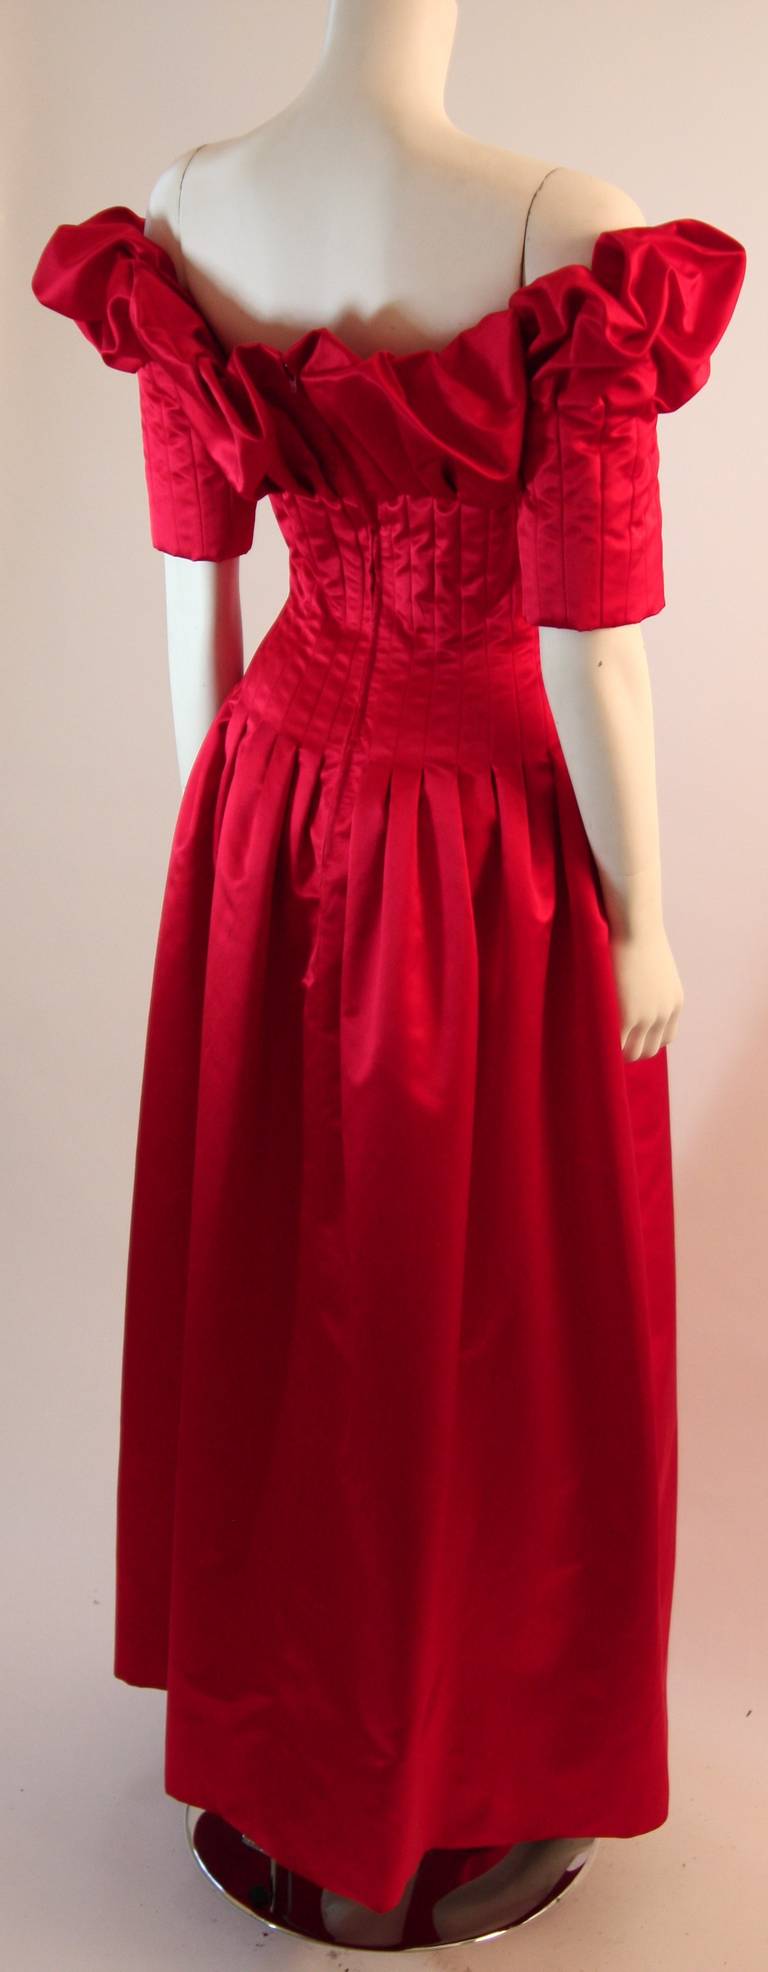 Stunning Nolan Miller Cardinal Red Tufted Silk Gown In Excellent Condition For Sale In Los Angeles, CA